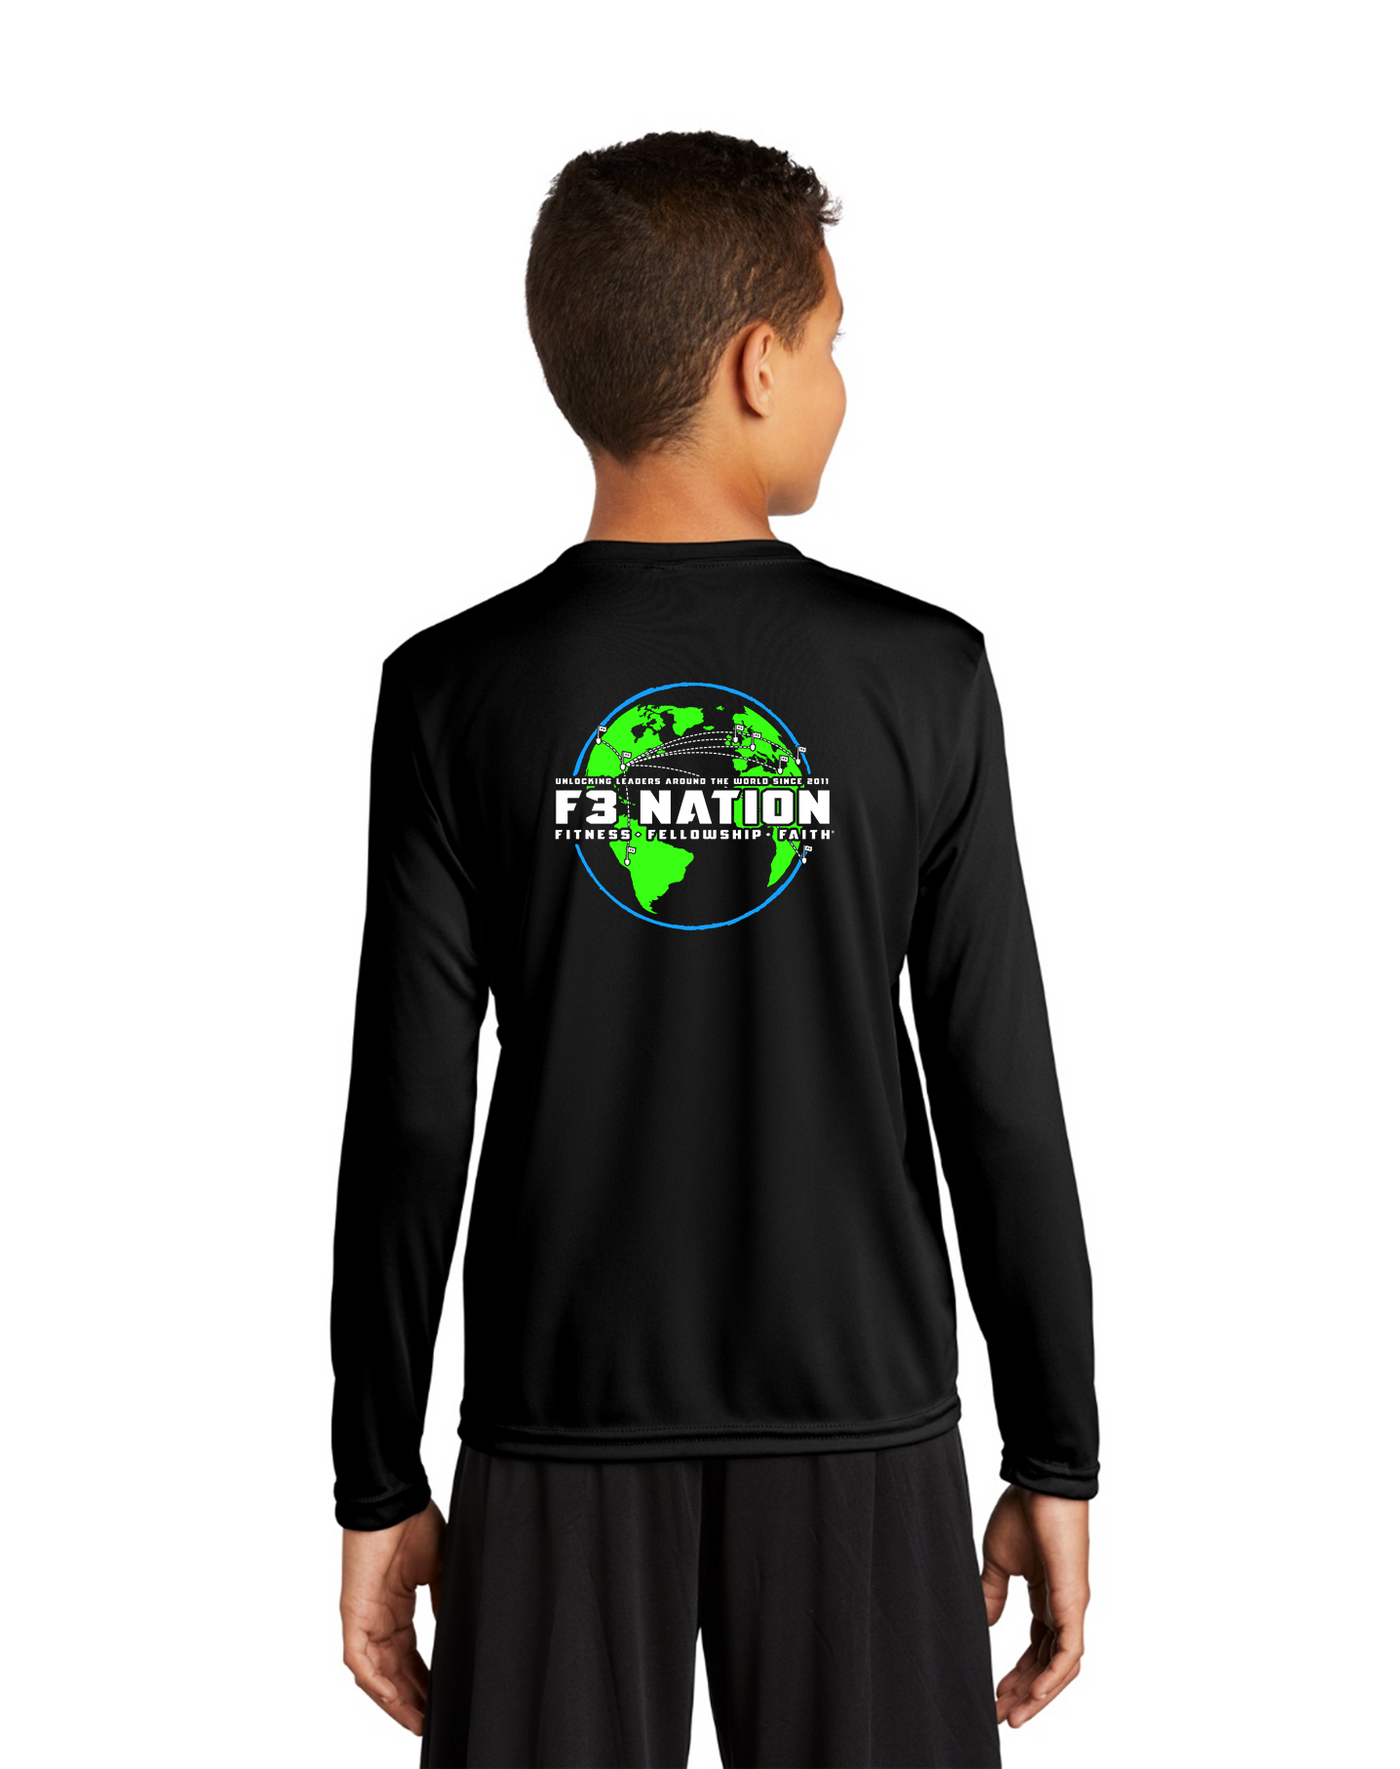 F3 2022 Race Jersey - Sport-Tek Youth Competitor Short and Long Sleeve Pre-Order